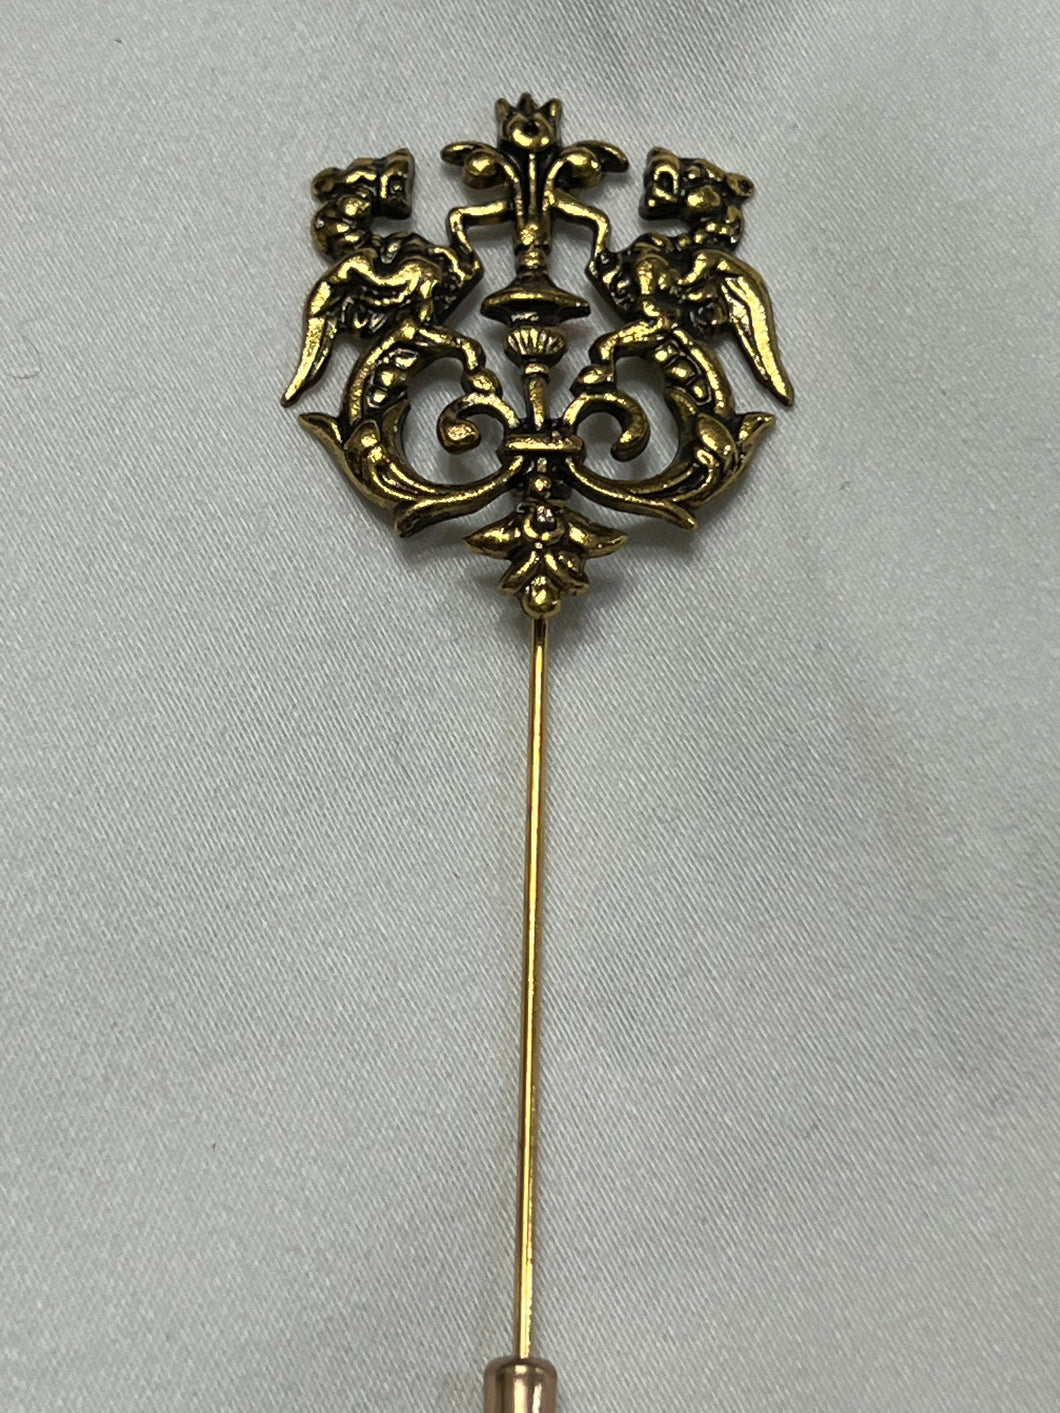 Coat of arms pin - Vintage